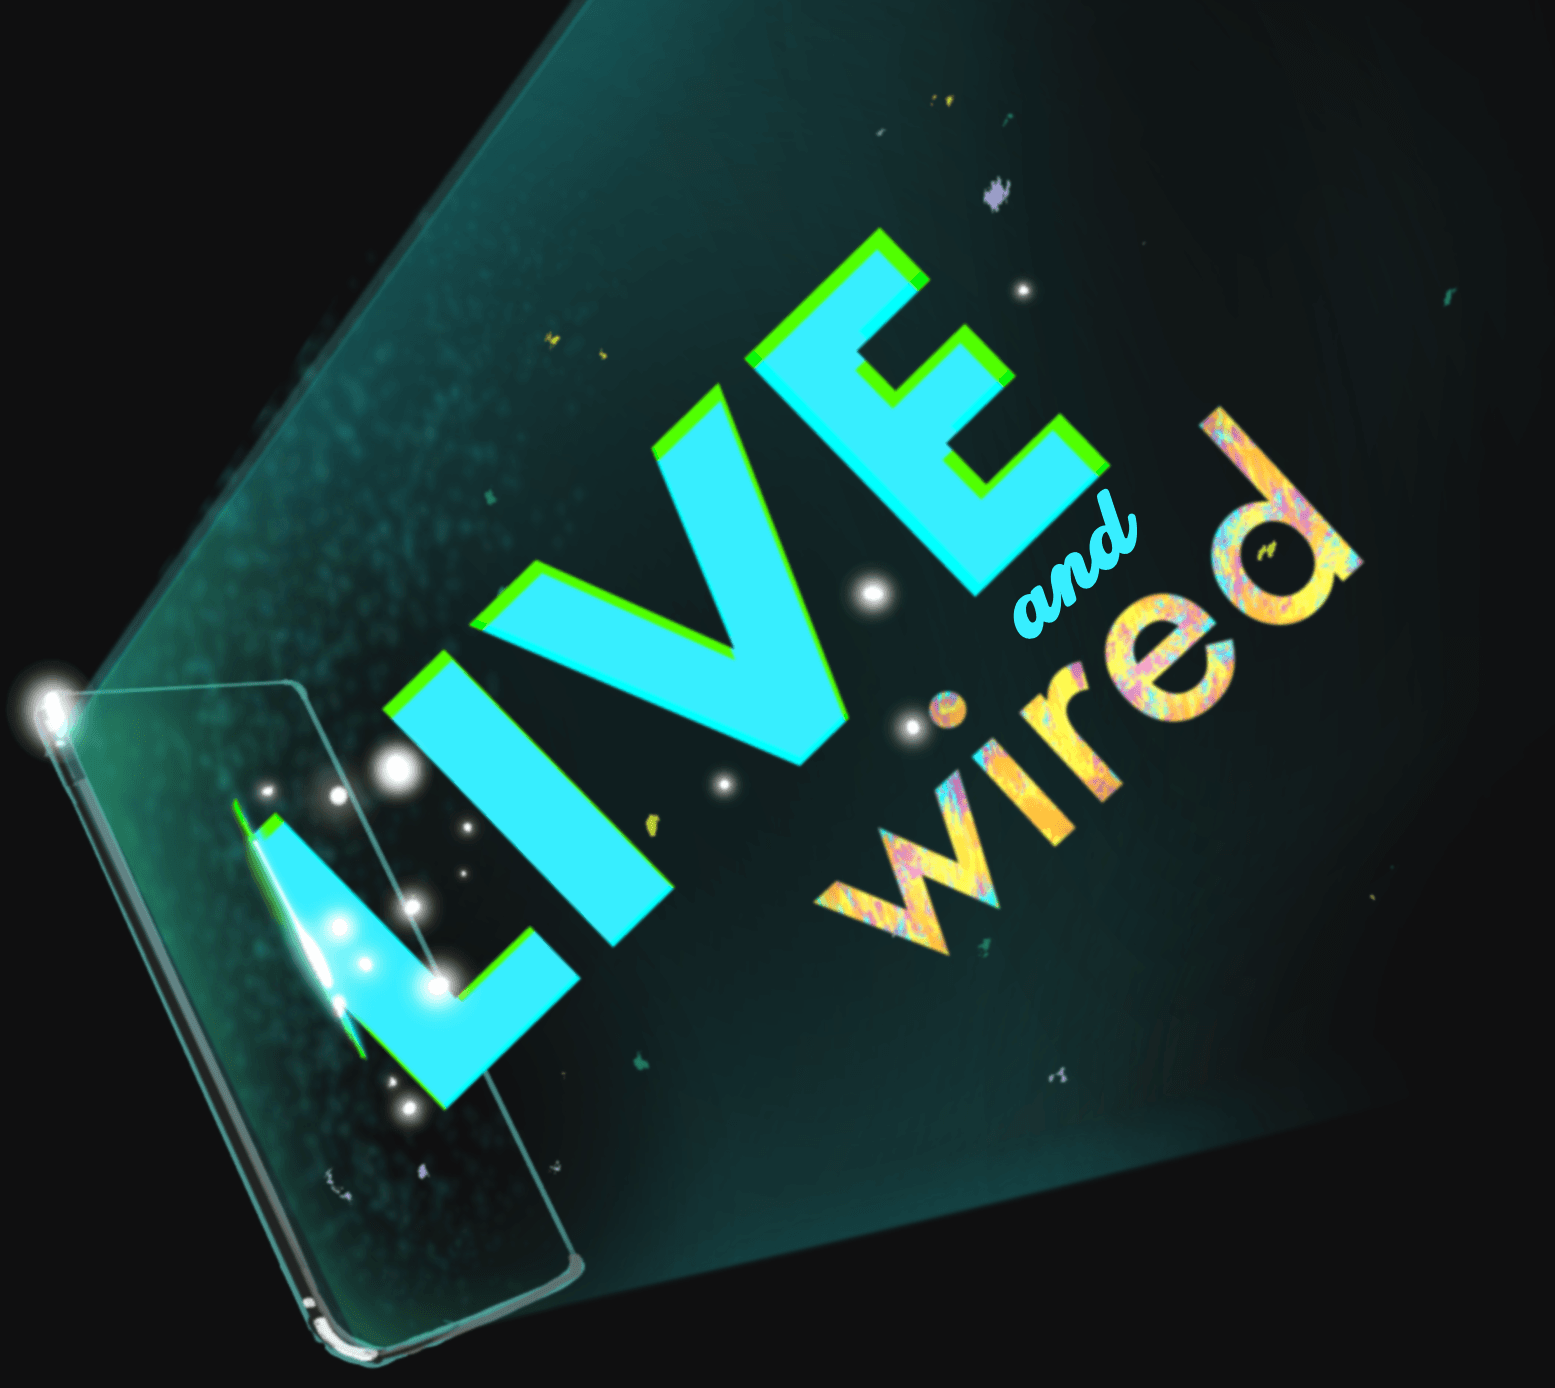 Live and wired